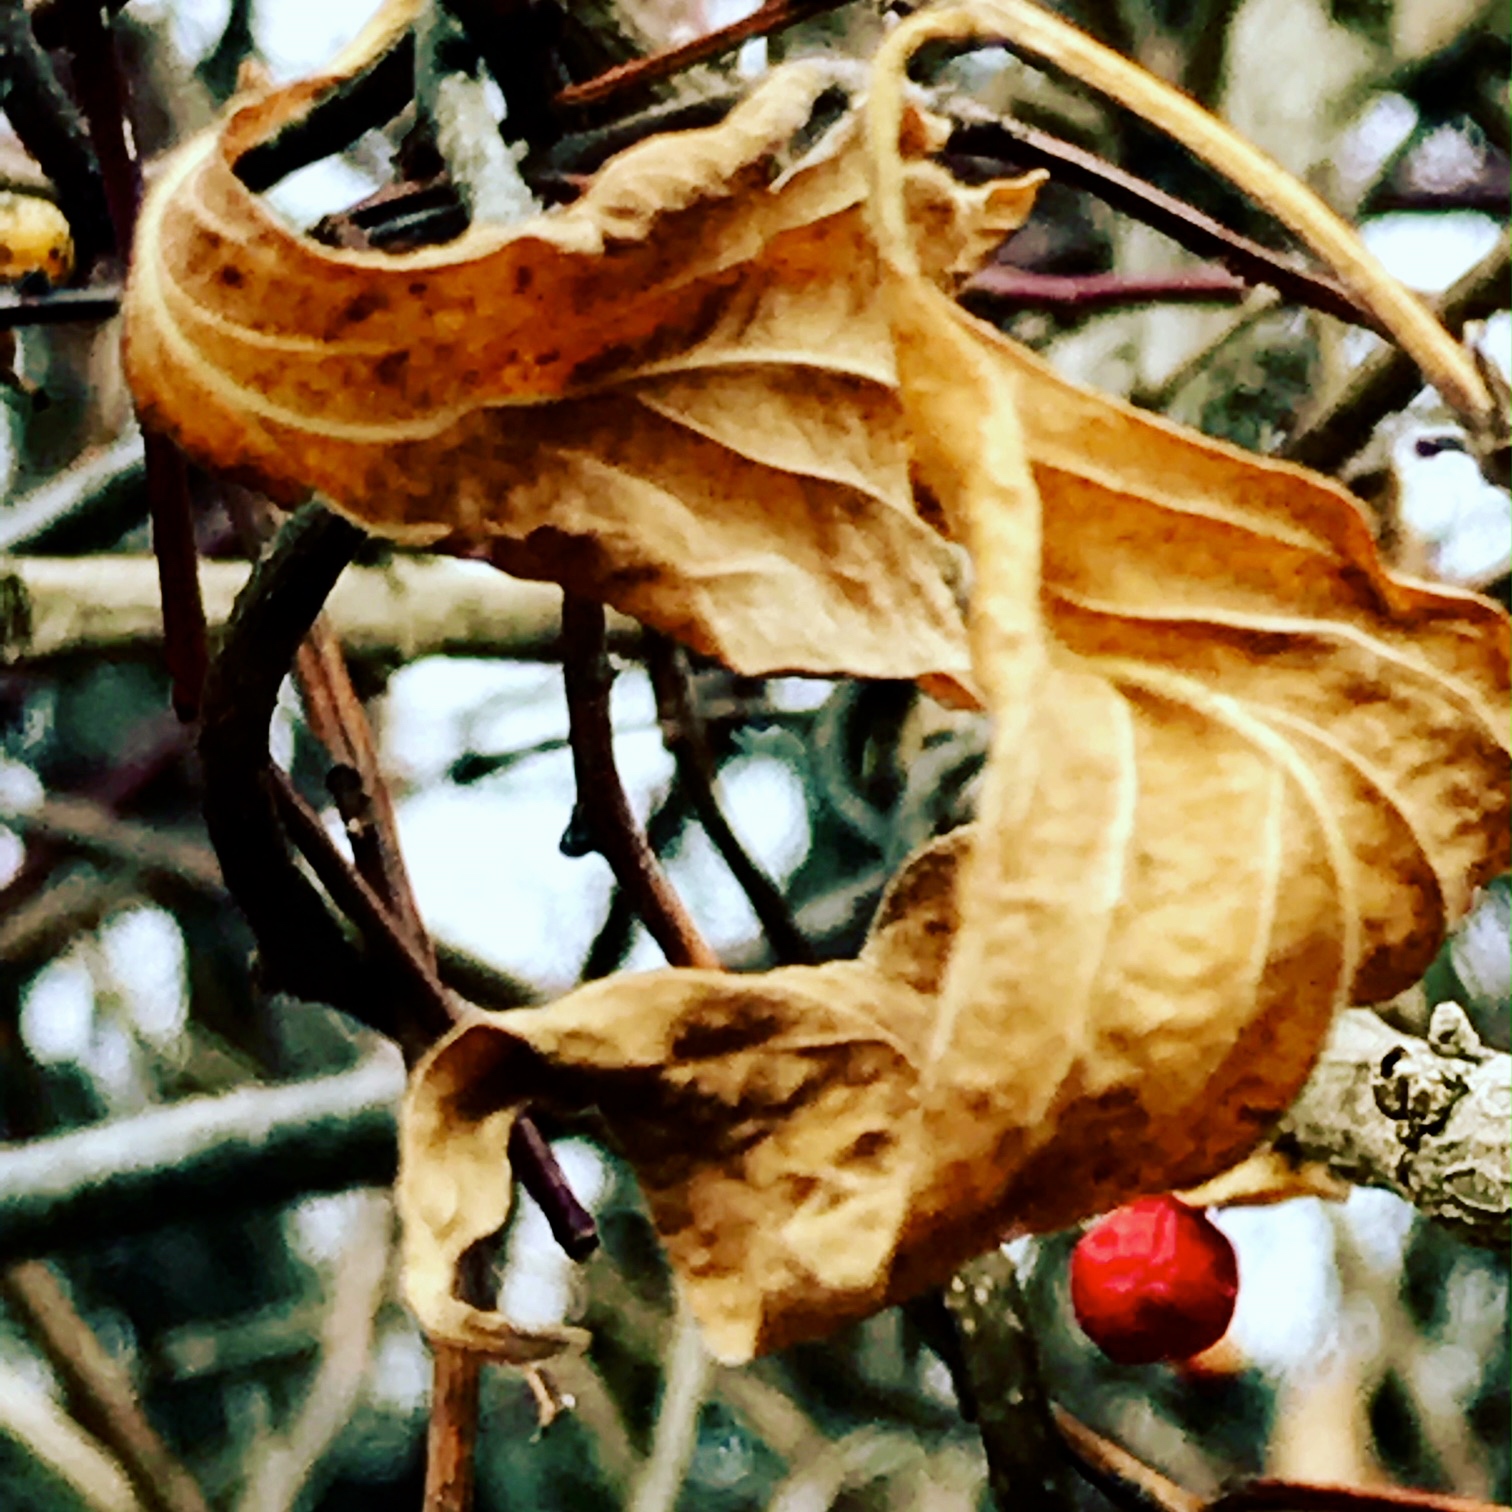 leaves and berry.JPG